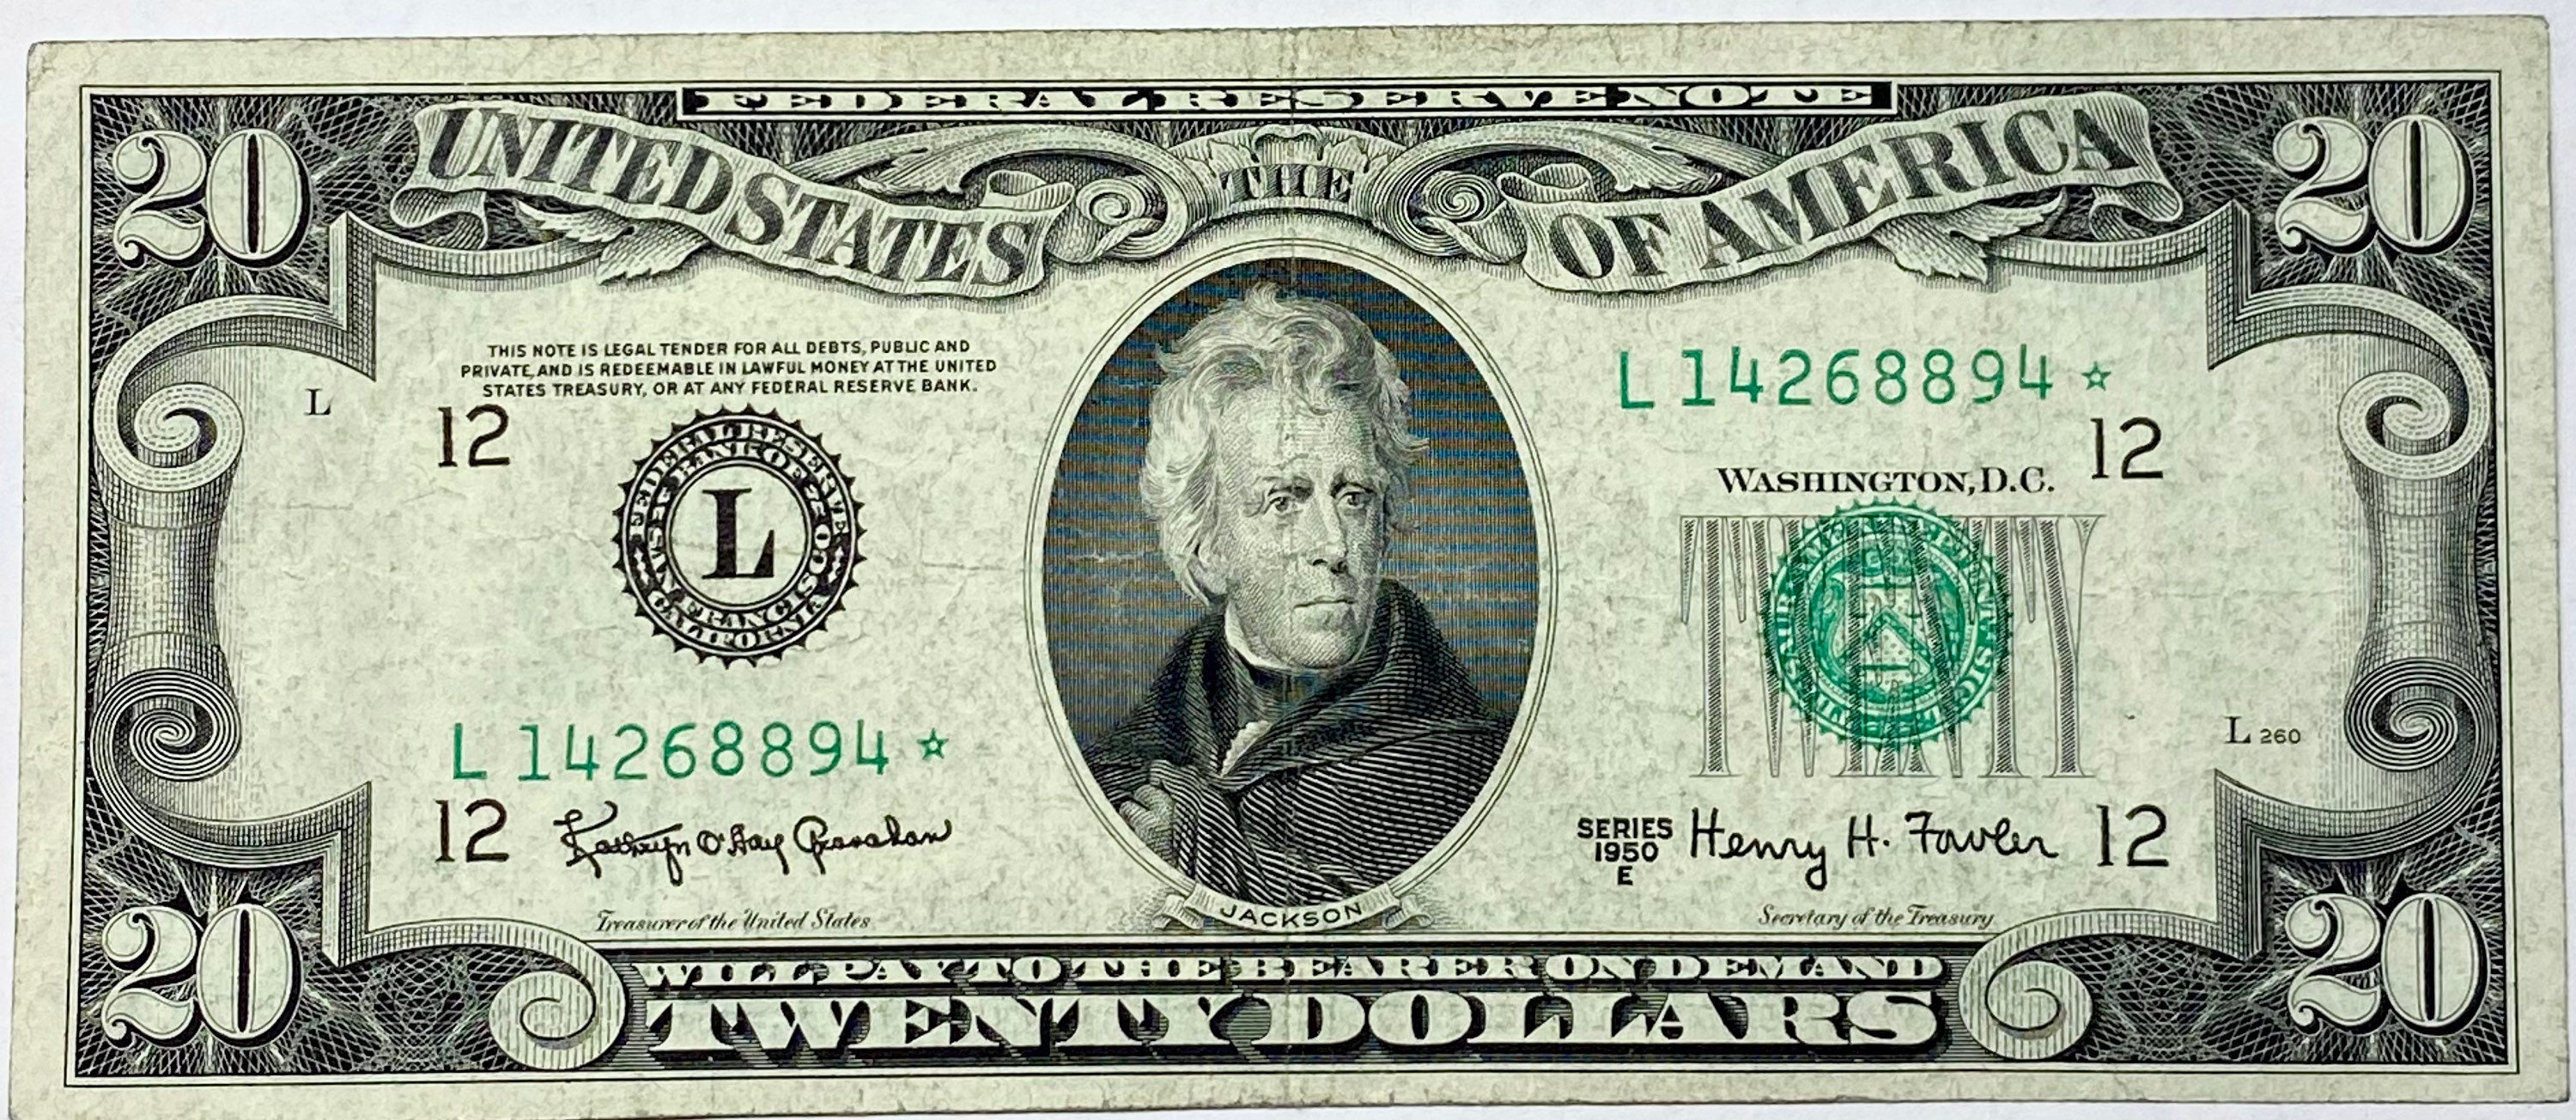 20 dollar bill with star note